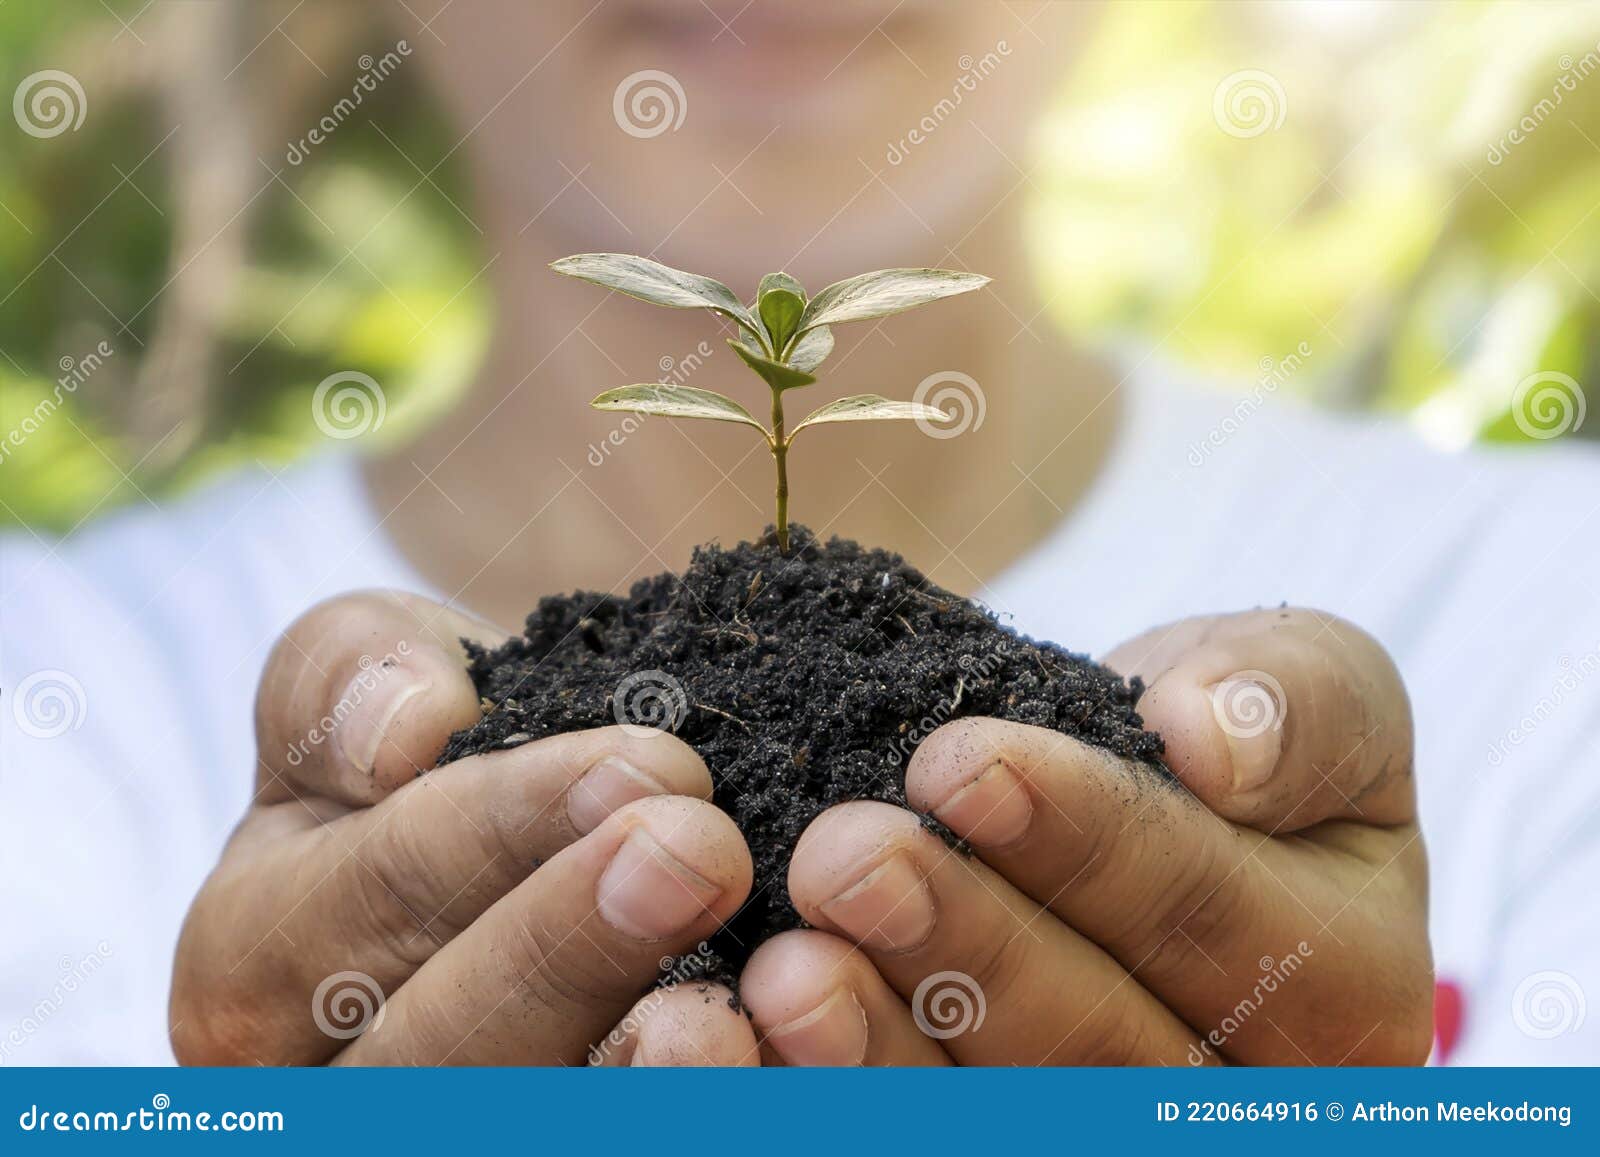 trees grow in soil by human hands, reforestation concept